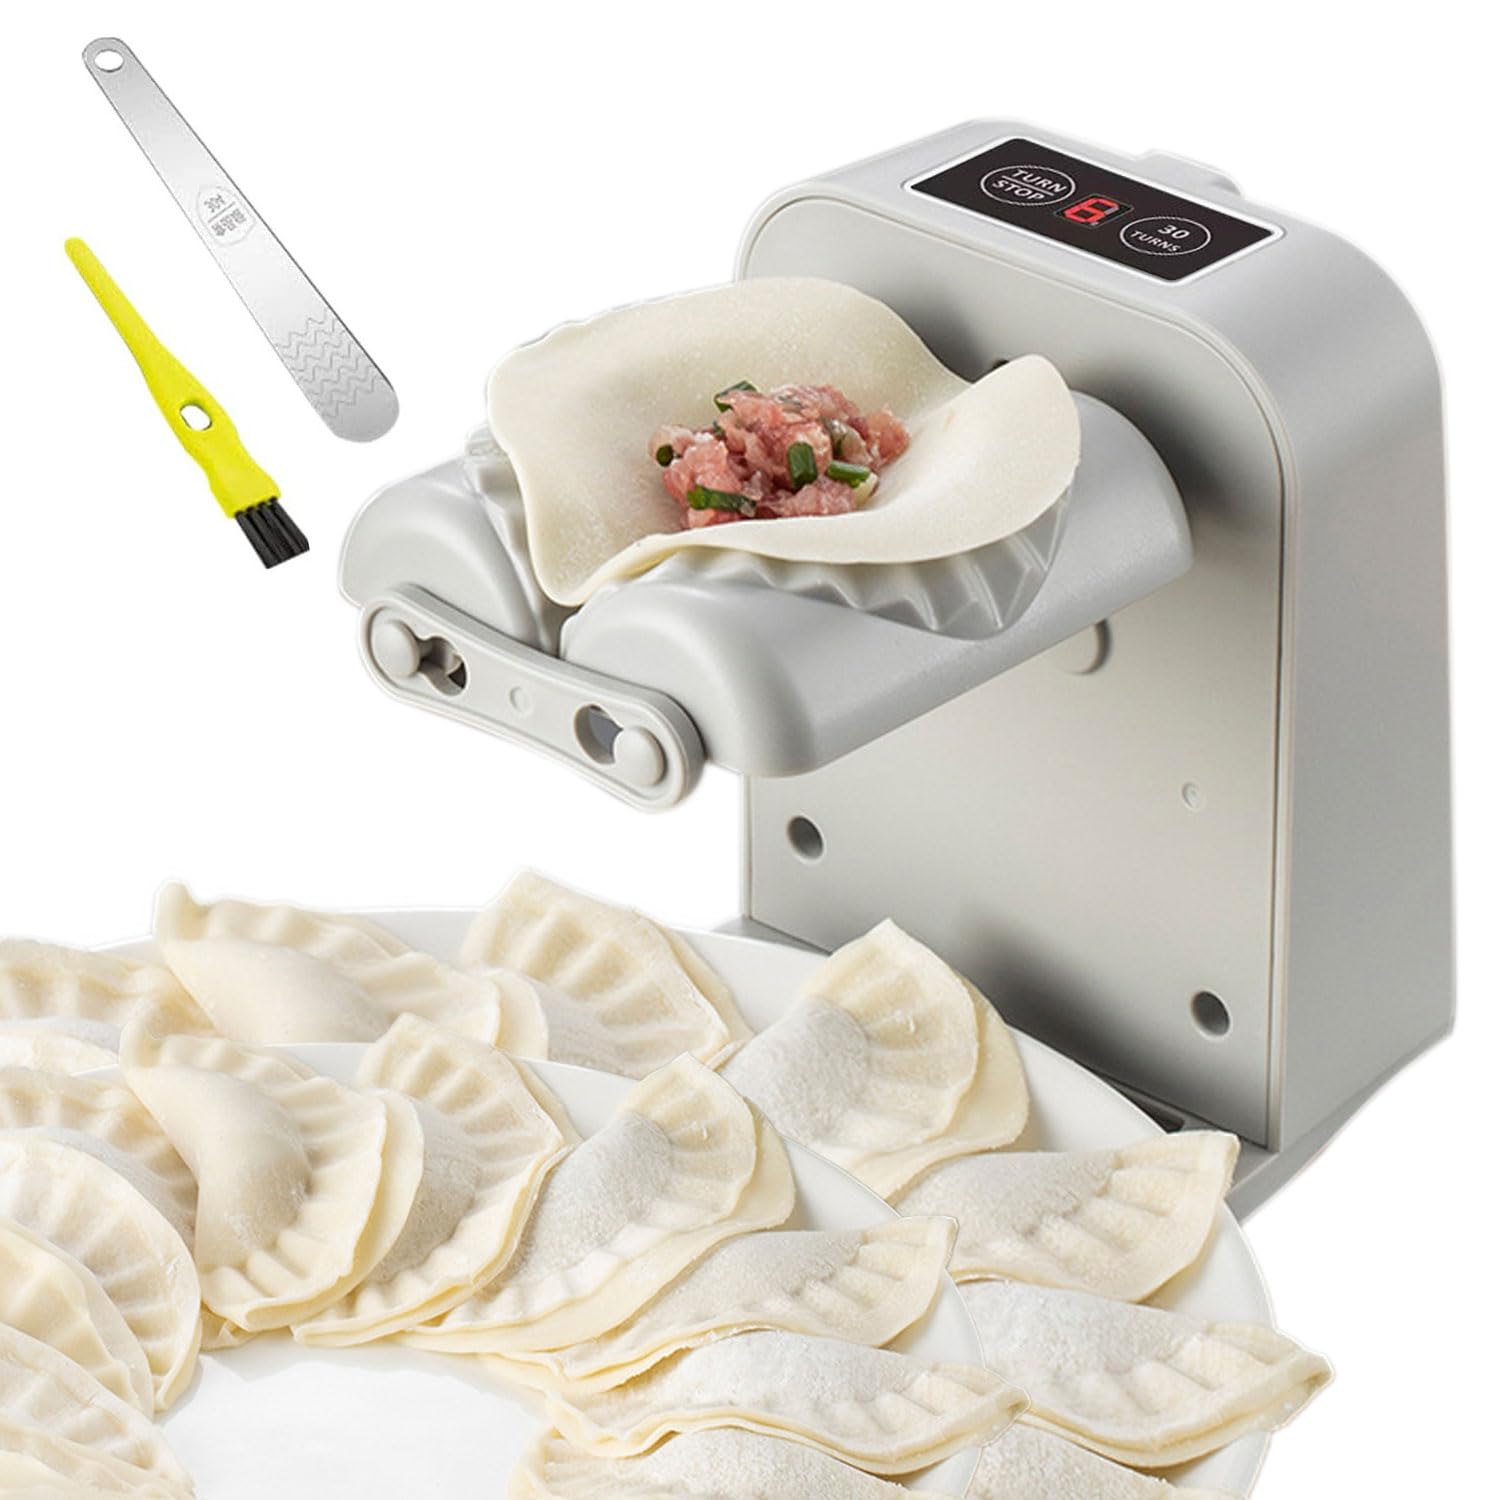 Automatic Electric Dumpling Press Maker Machine - Adjustable and Easy to Operate, With Spoon and Brush - For Home Kitchen Pastry Making (White)